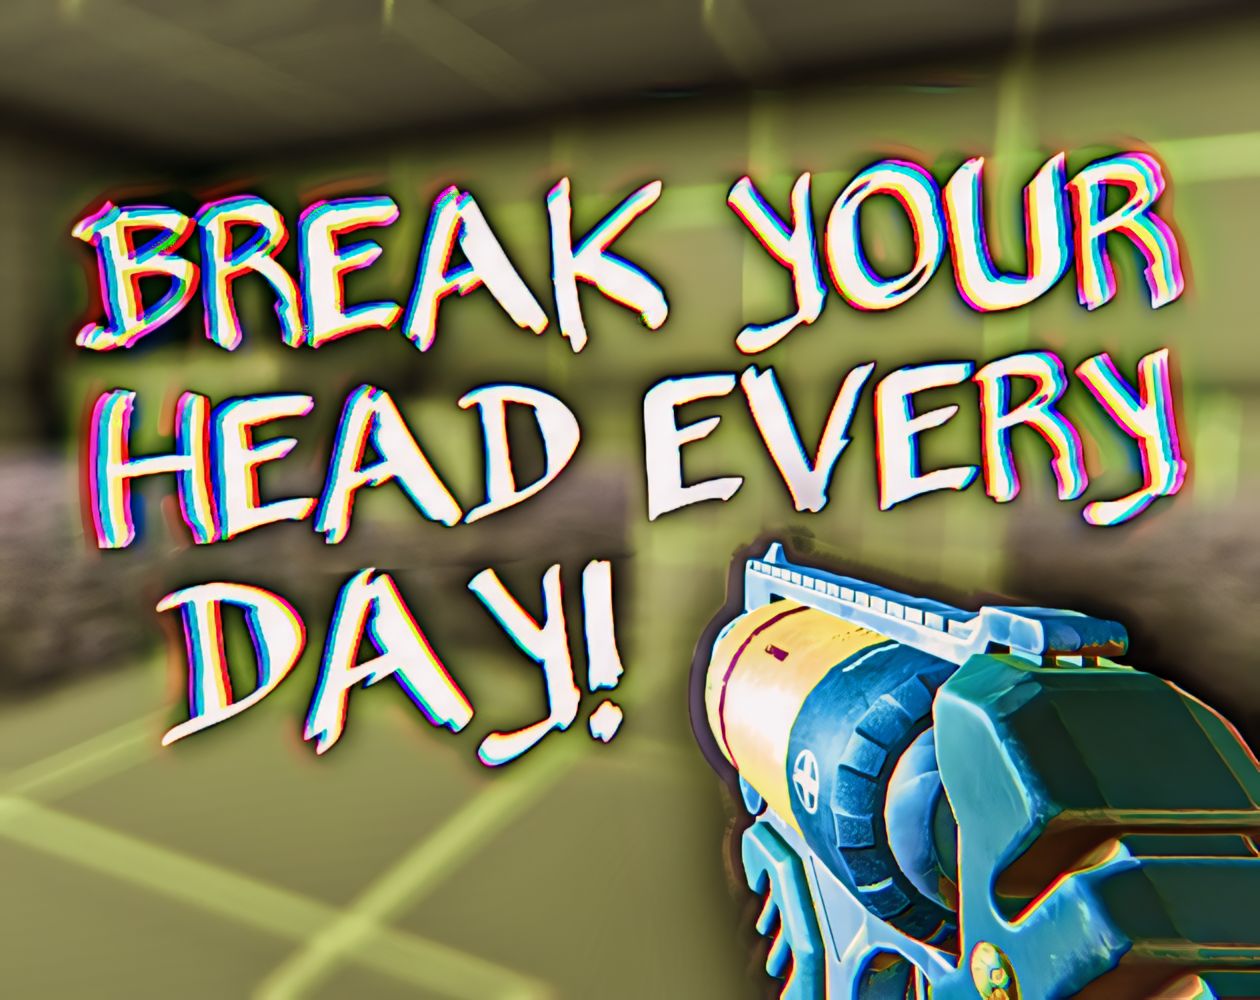 BREAK YOUR HEAD EVERY DAY!